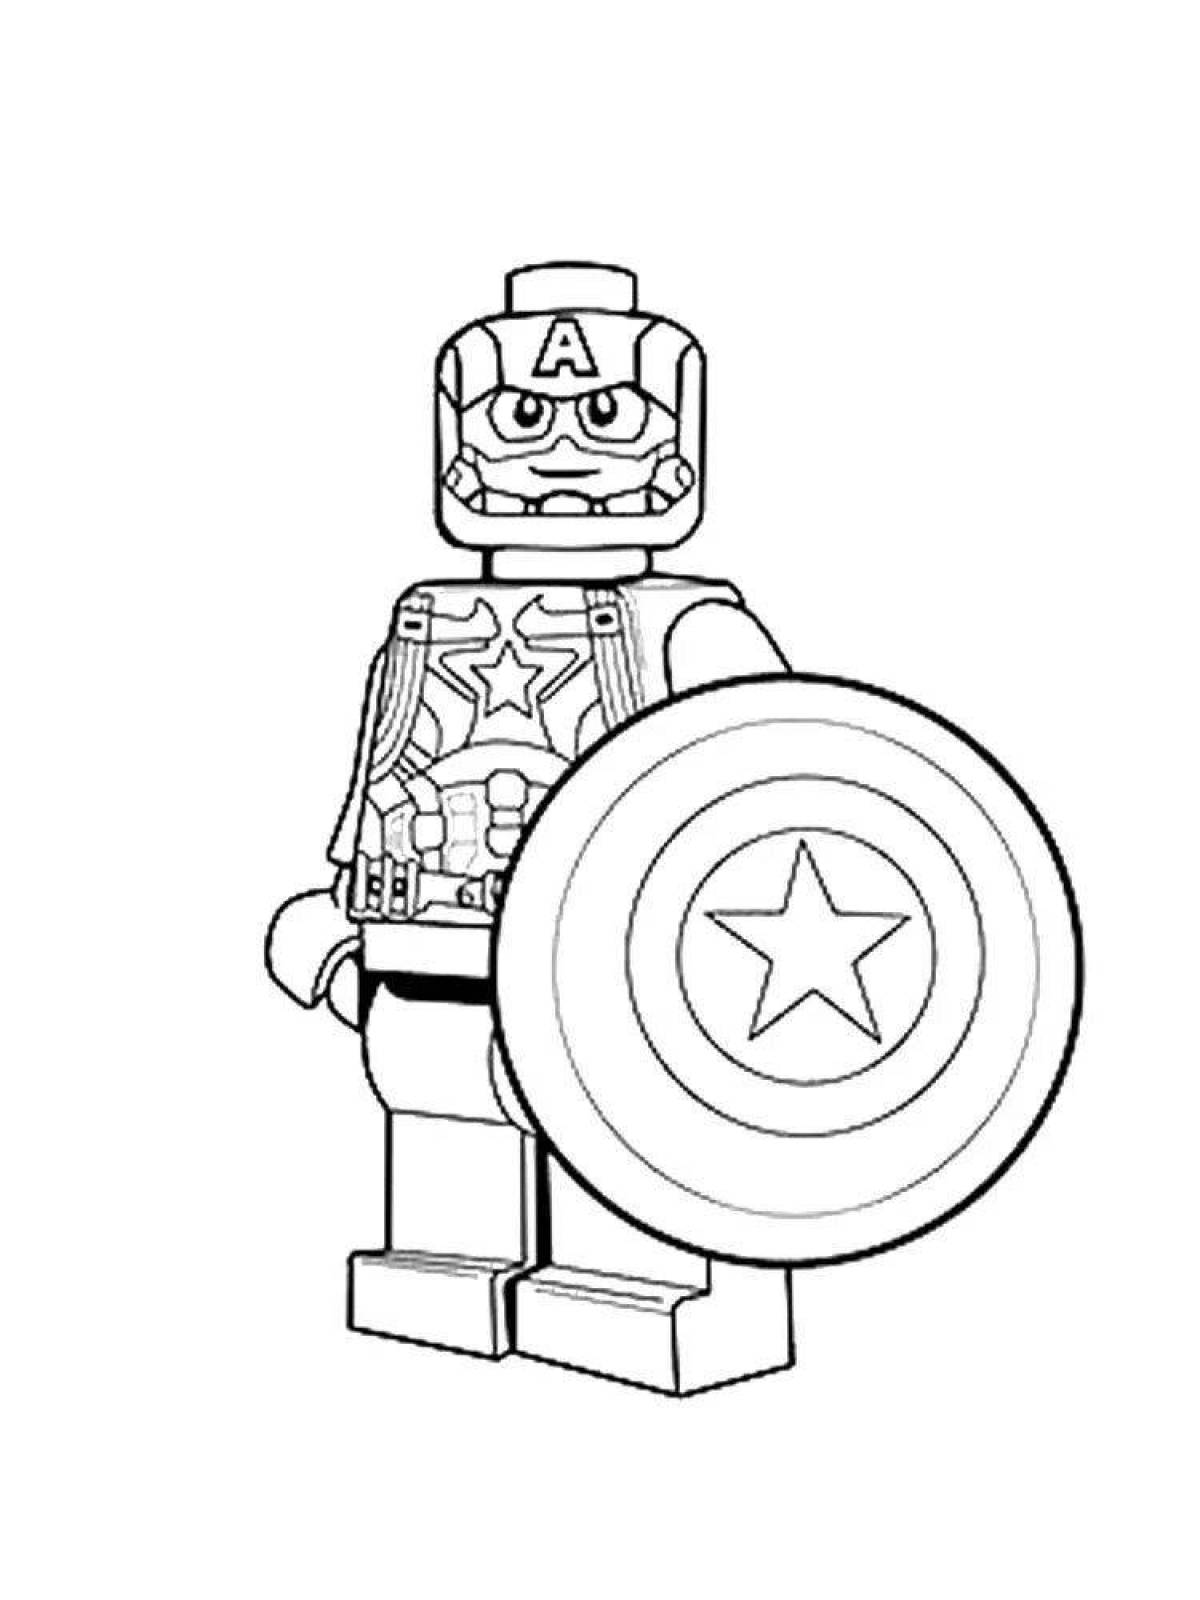 Great lego captain america coloring page